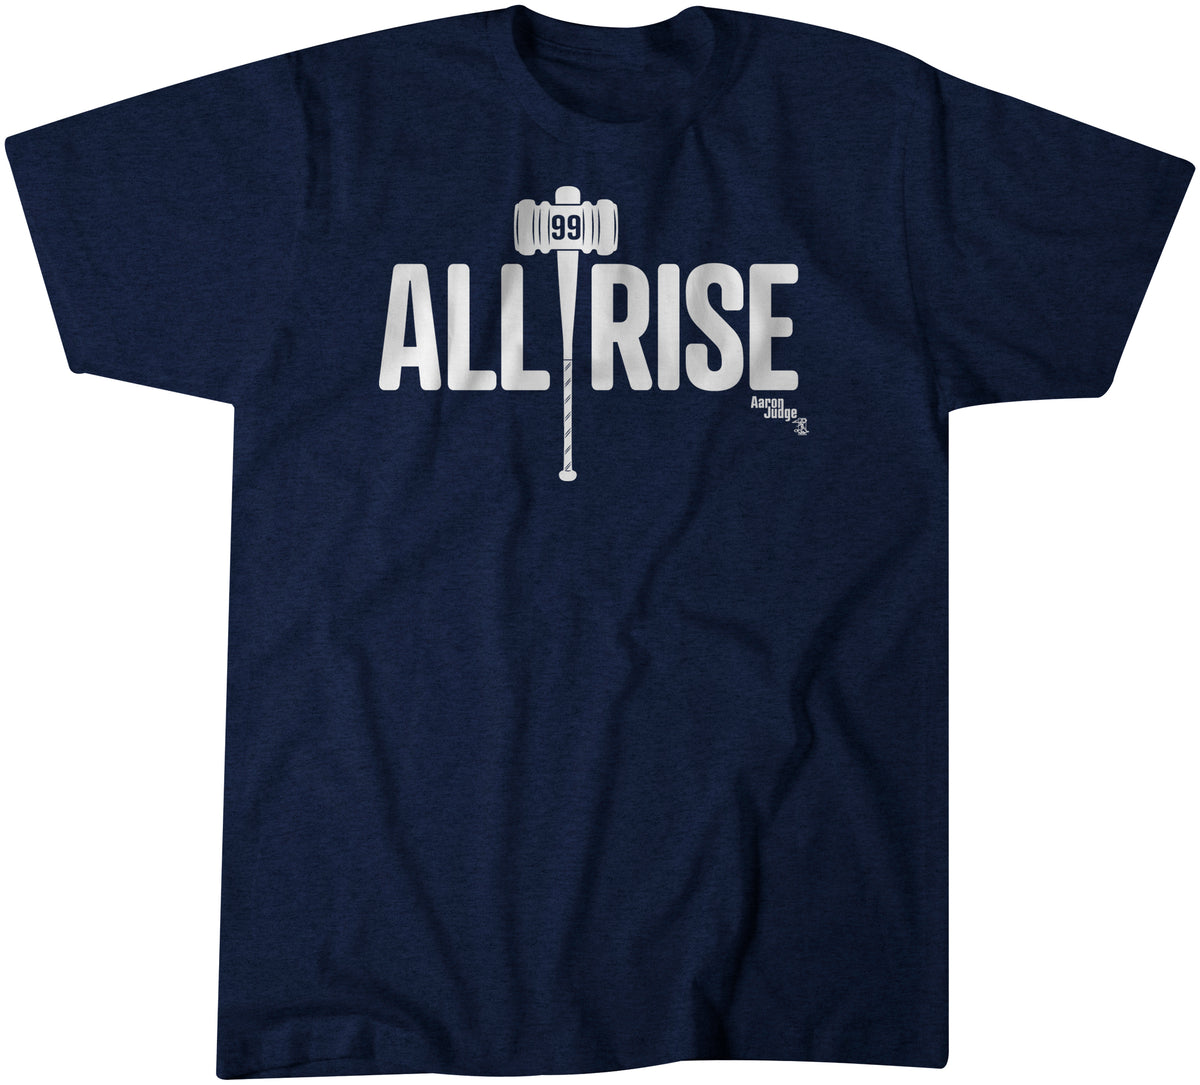 all rise aaron judge jersey